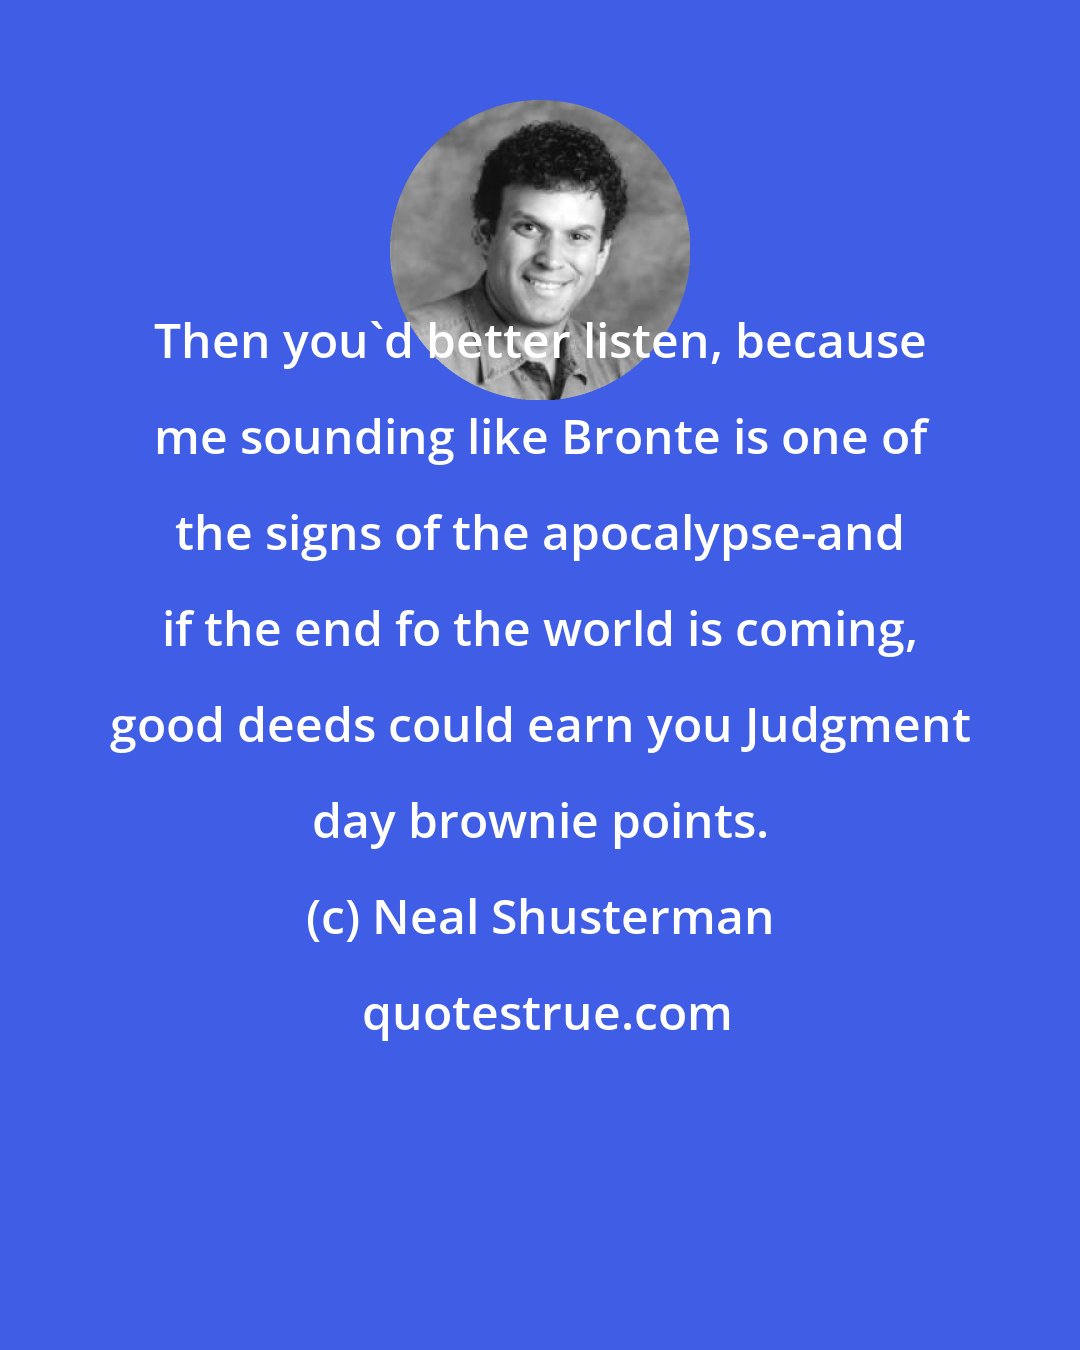 Neal Shusterman: Then you'd better listen, because me sounding like Bronte is one of the signs of the apocalypse-and if the end fo the world is coming, good deeds could earn you Judgment day brownie points.